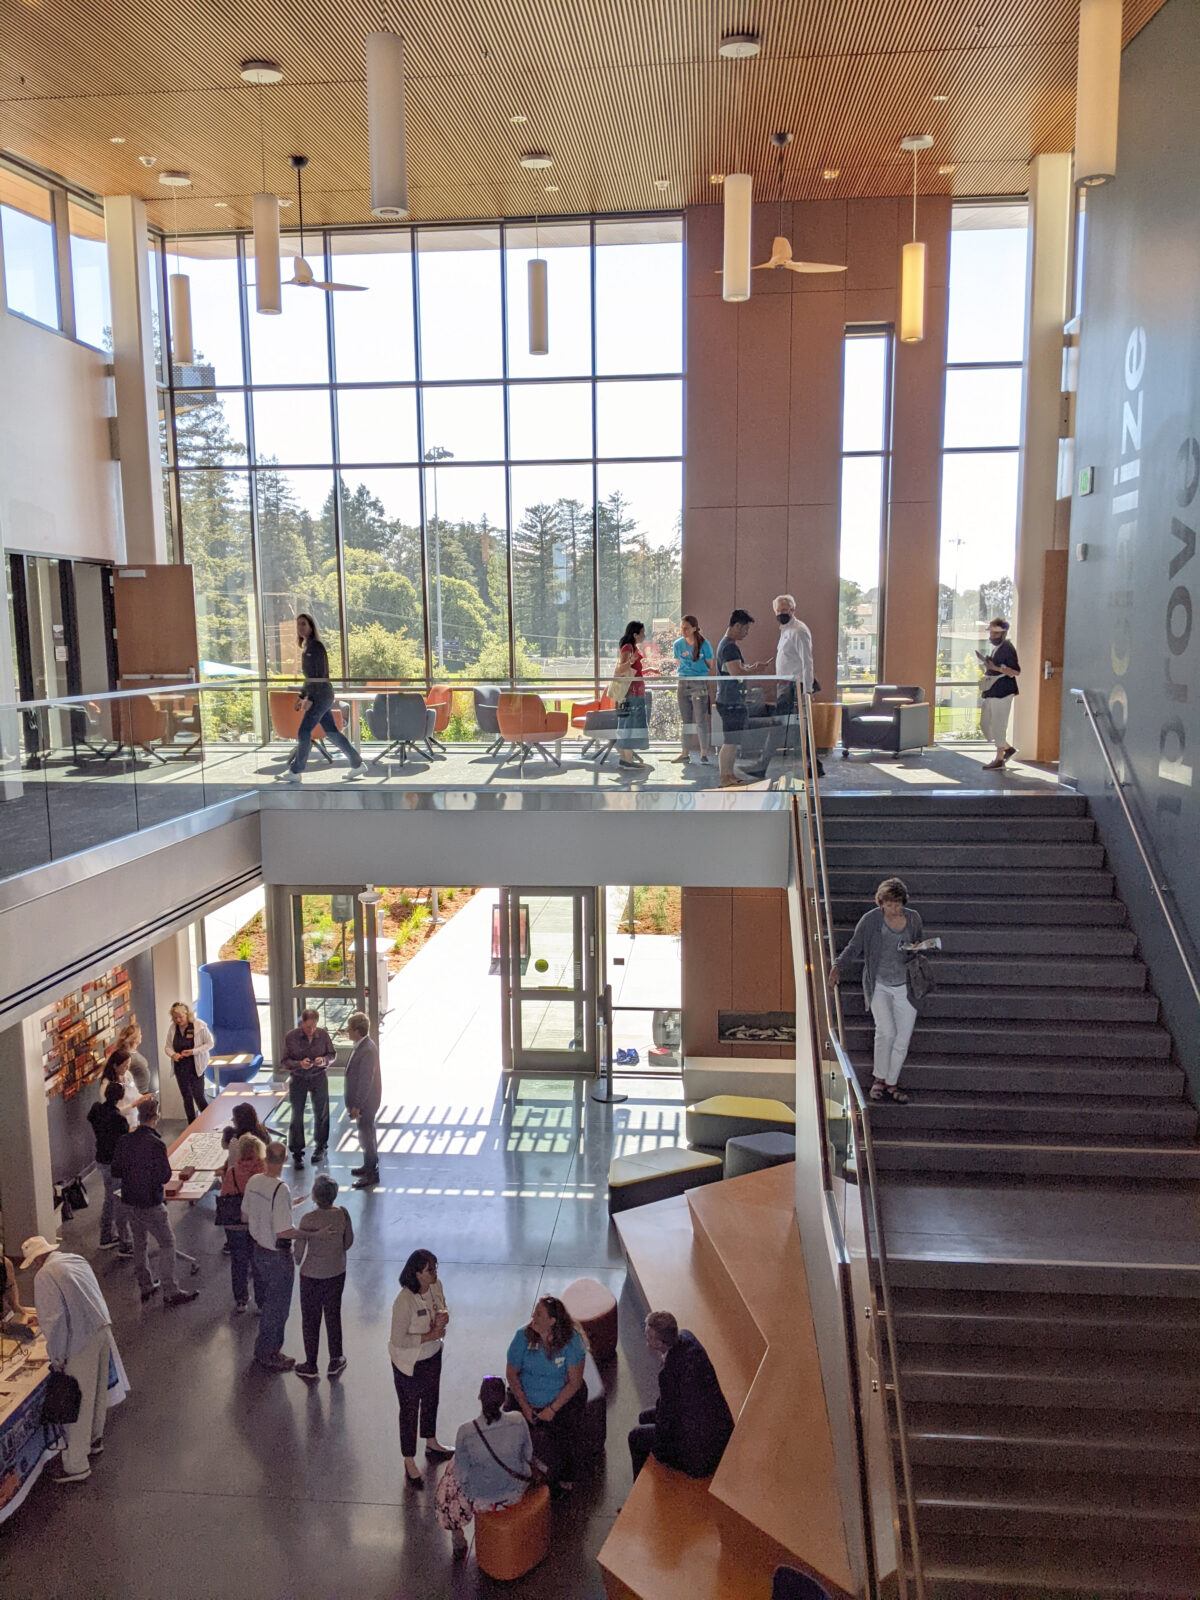 Entry and central staircase inside the Burlingame Community Center